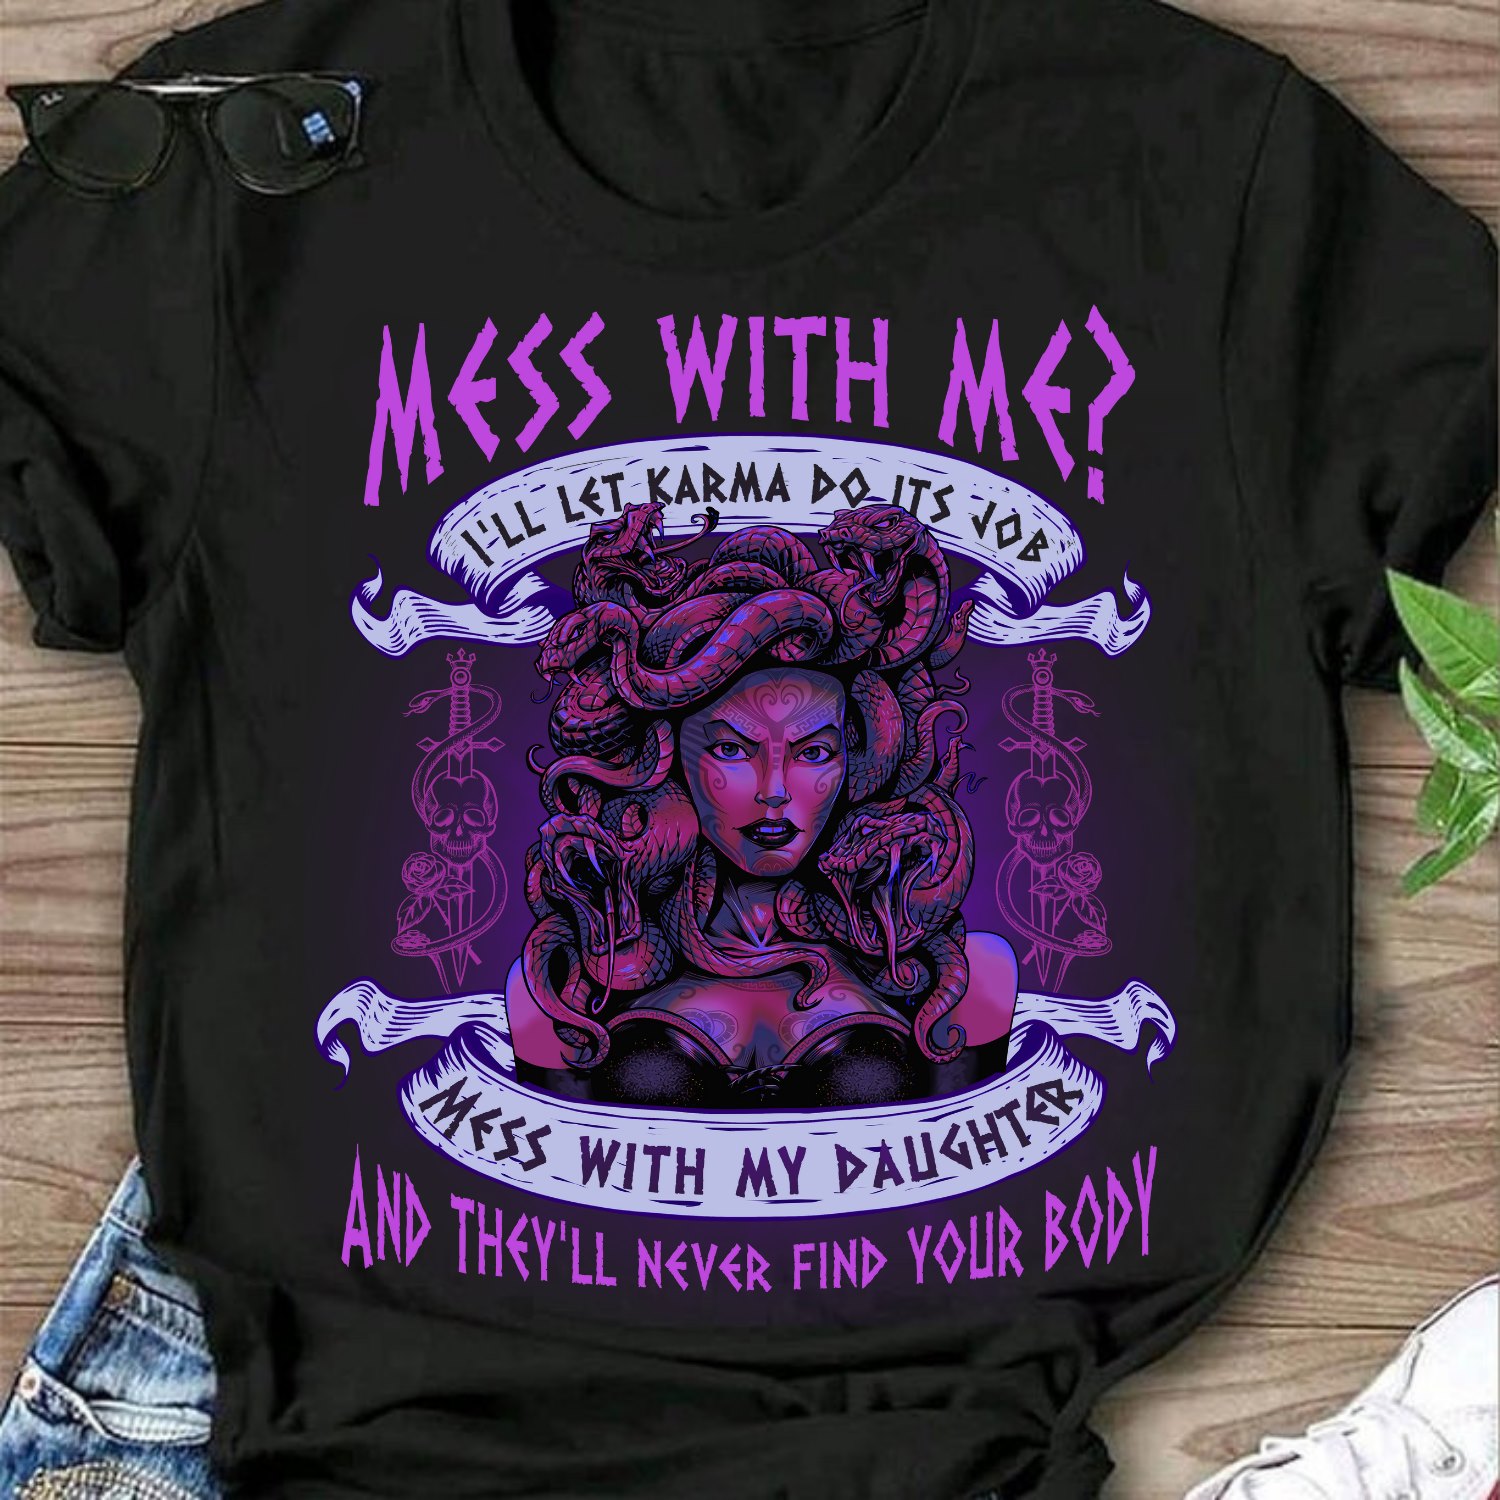 Mess with me, I'll let Karma do its job - Mess with my daughter and they'll never find your body - Medusa Snake head woman